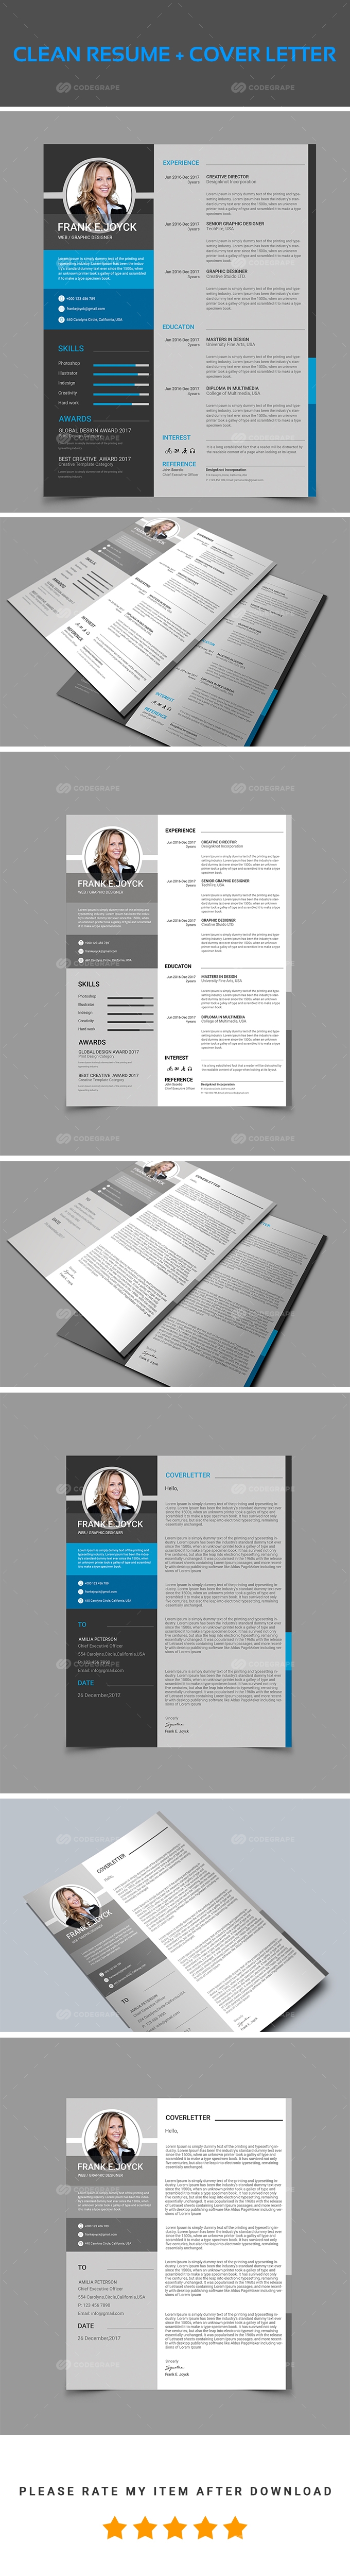 Clean Resume + Cover Letter